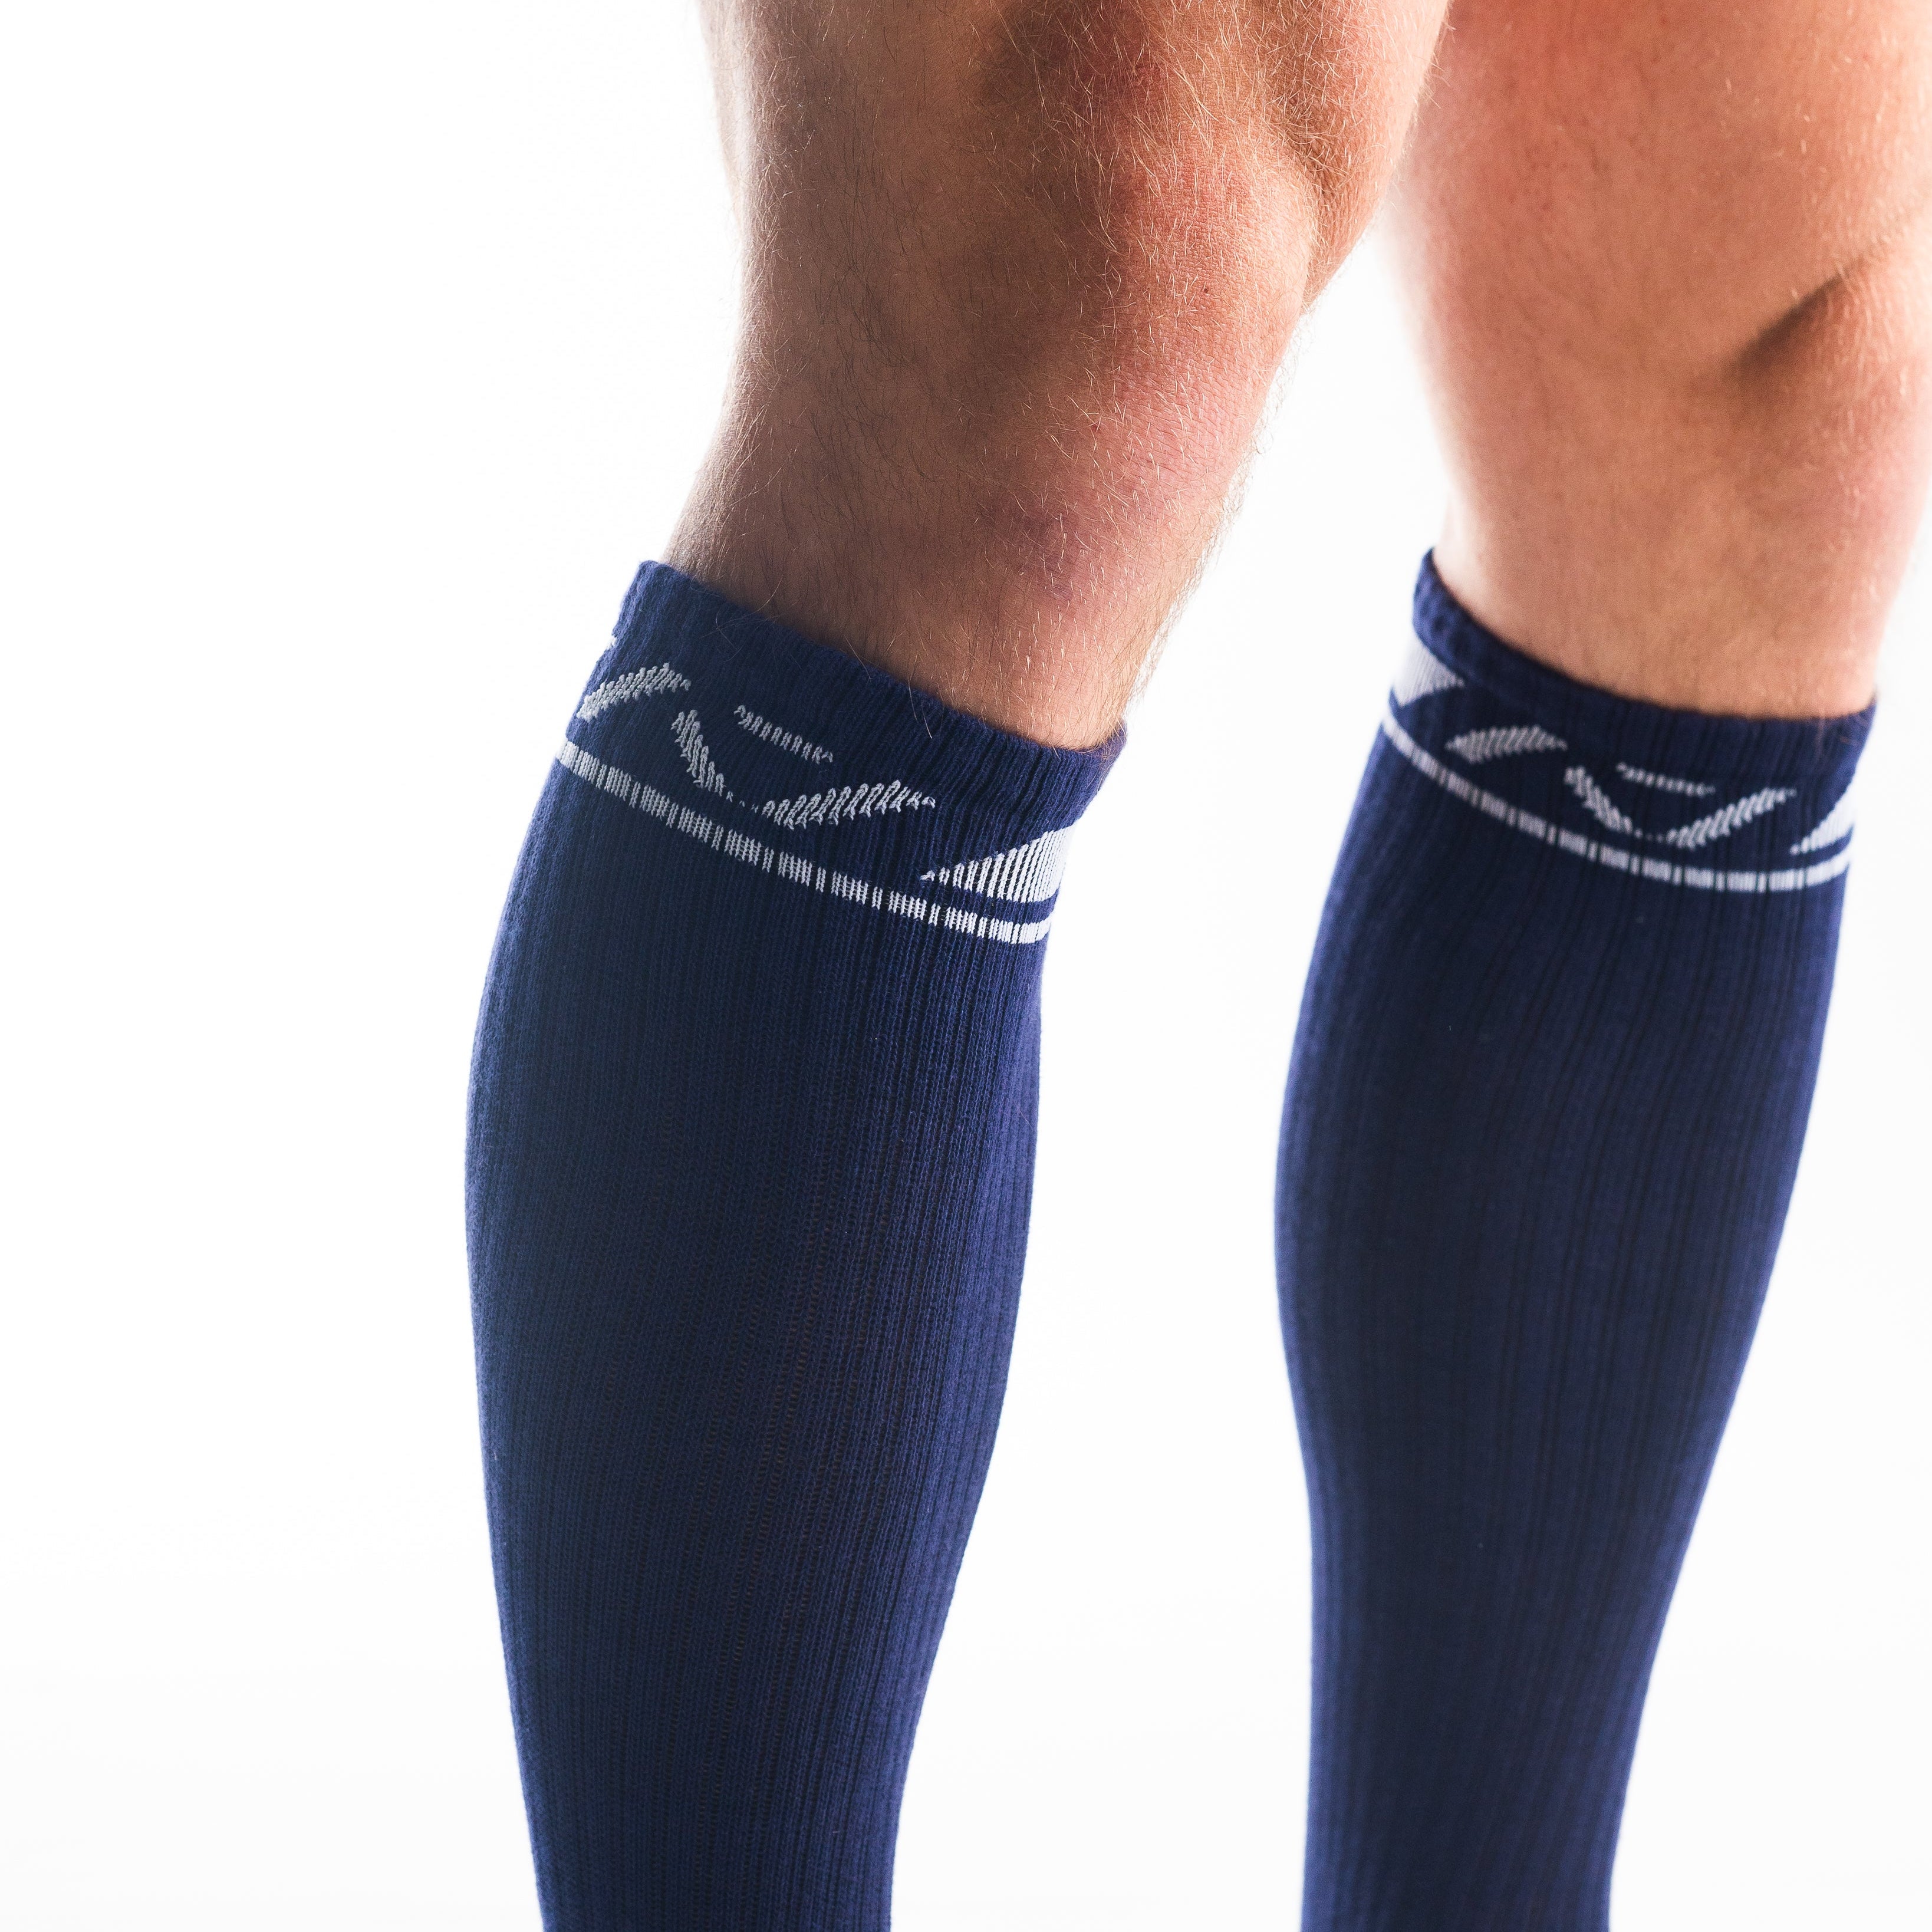 A7 Night Light deadlift socks are designed specifically for pulls and keep your shins protected from scrapes. A7 deadlift socks are a perfect pair to wear in training or powerlifting competition. The A7 IPF Approved Kit includes Powerlifting Singlet, A7 Meet Shirt, A7 Zebra Wrist Wraps, A7 Deadlift Socks, Hourglass Knee Sleeves (Stiff Knee Sleeves and Rigor Mortis Knee Sleeves). All A7 Powerlifting Equipment shipping to UK, Norway, Switzerland and Iceland.